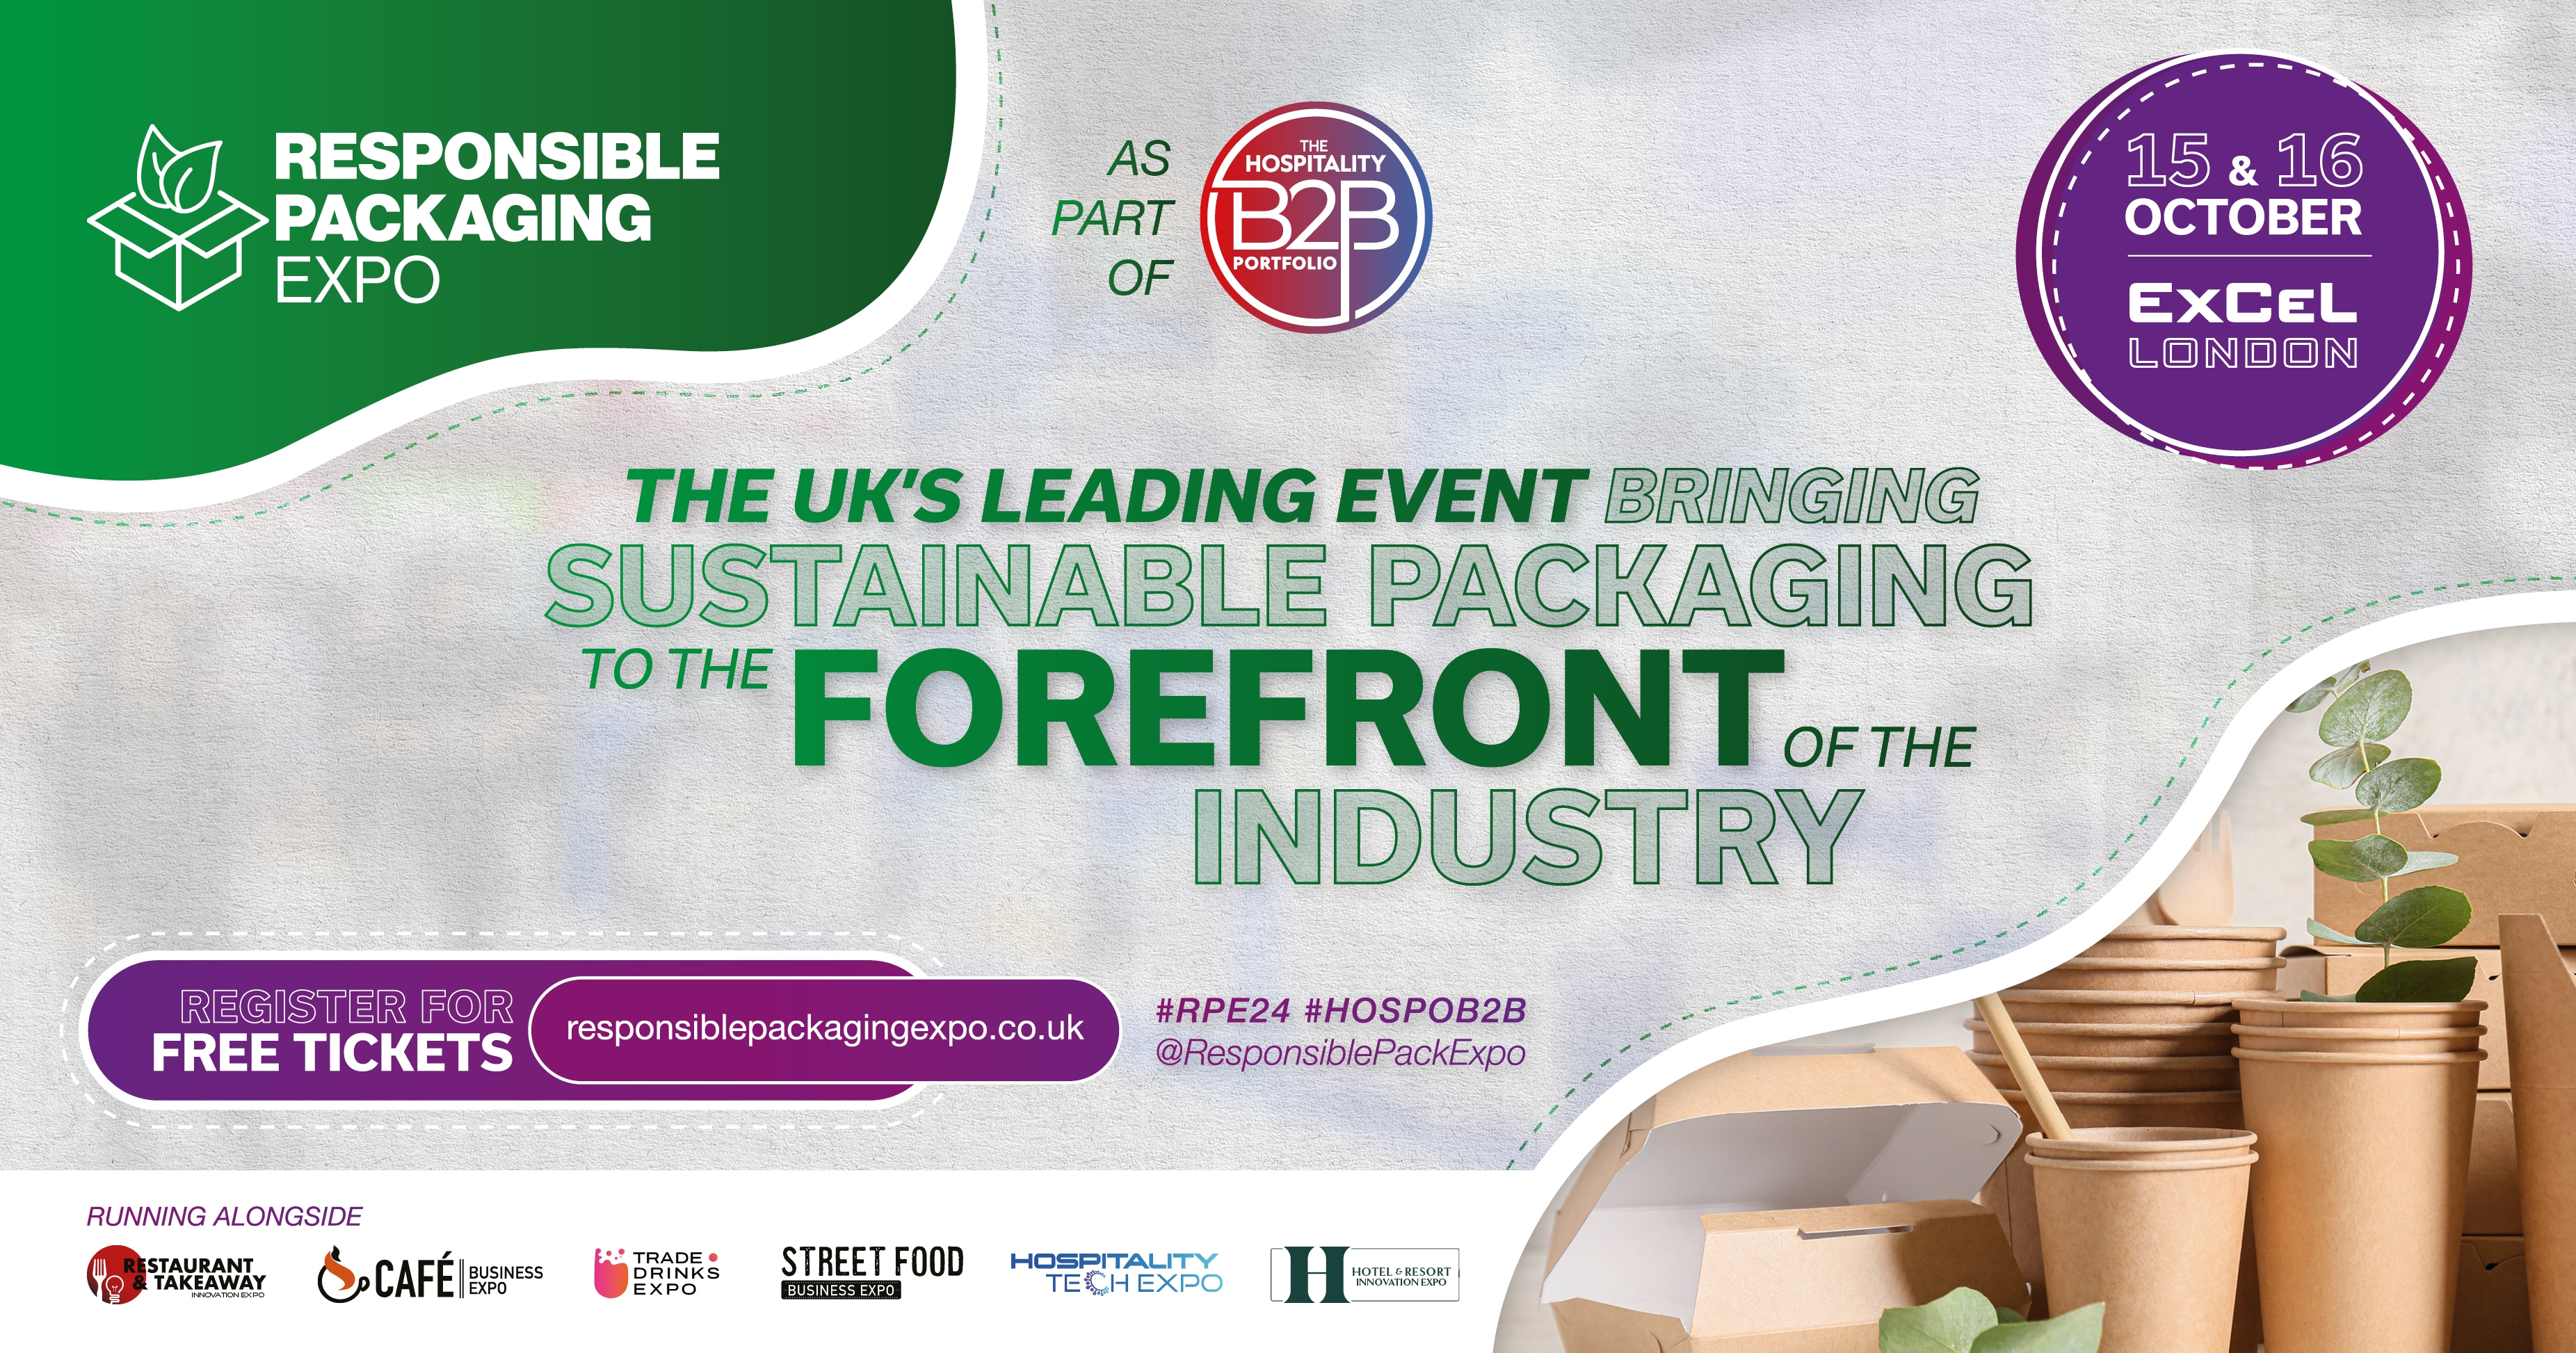 Responsible Packaging Expo to showcase sustainable developments in hospitality industry